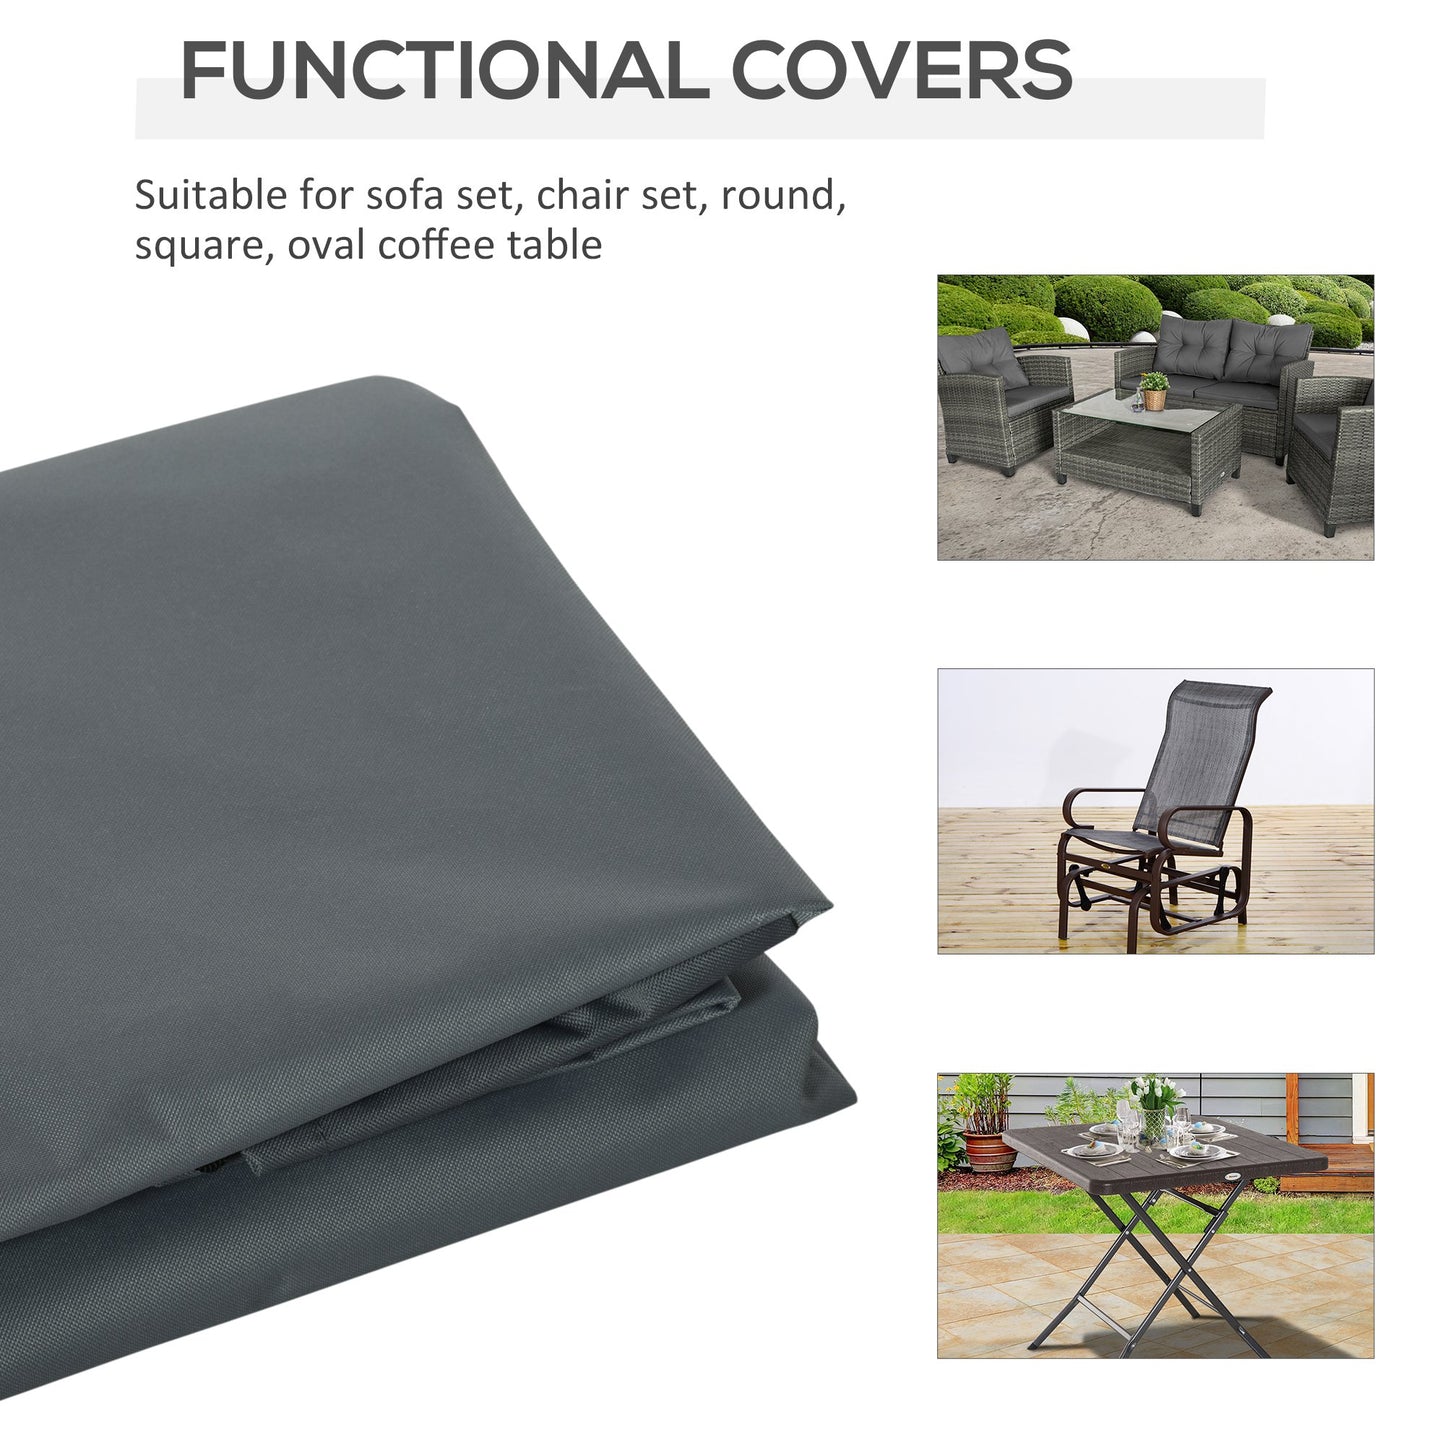 Outsunny 200x86cm Outdoor Garden Rattan Furniture Protective Cover Water UV Resistant